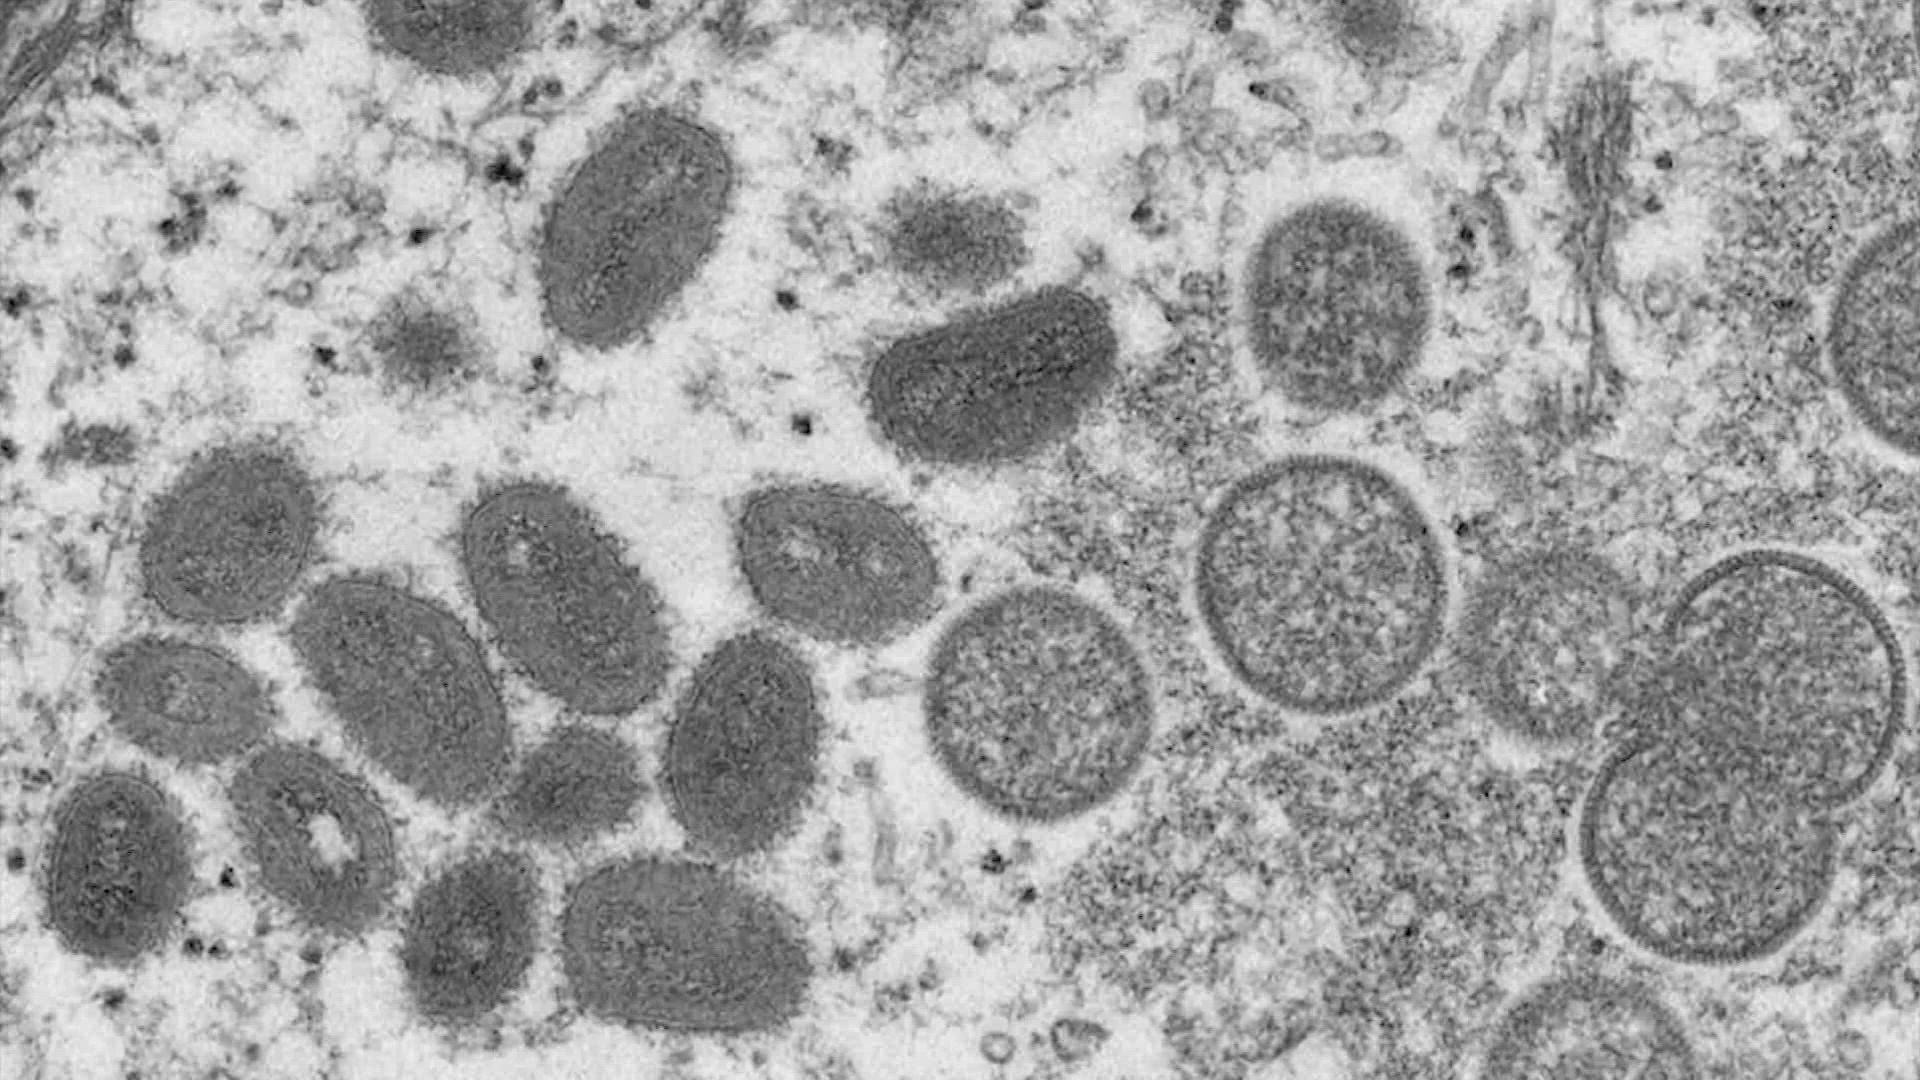 The number of monkeypox cases in Texas is now 20, according to the Department of Health Services.